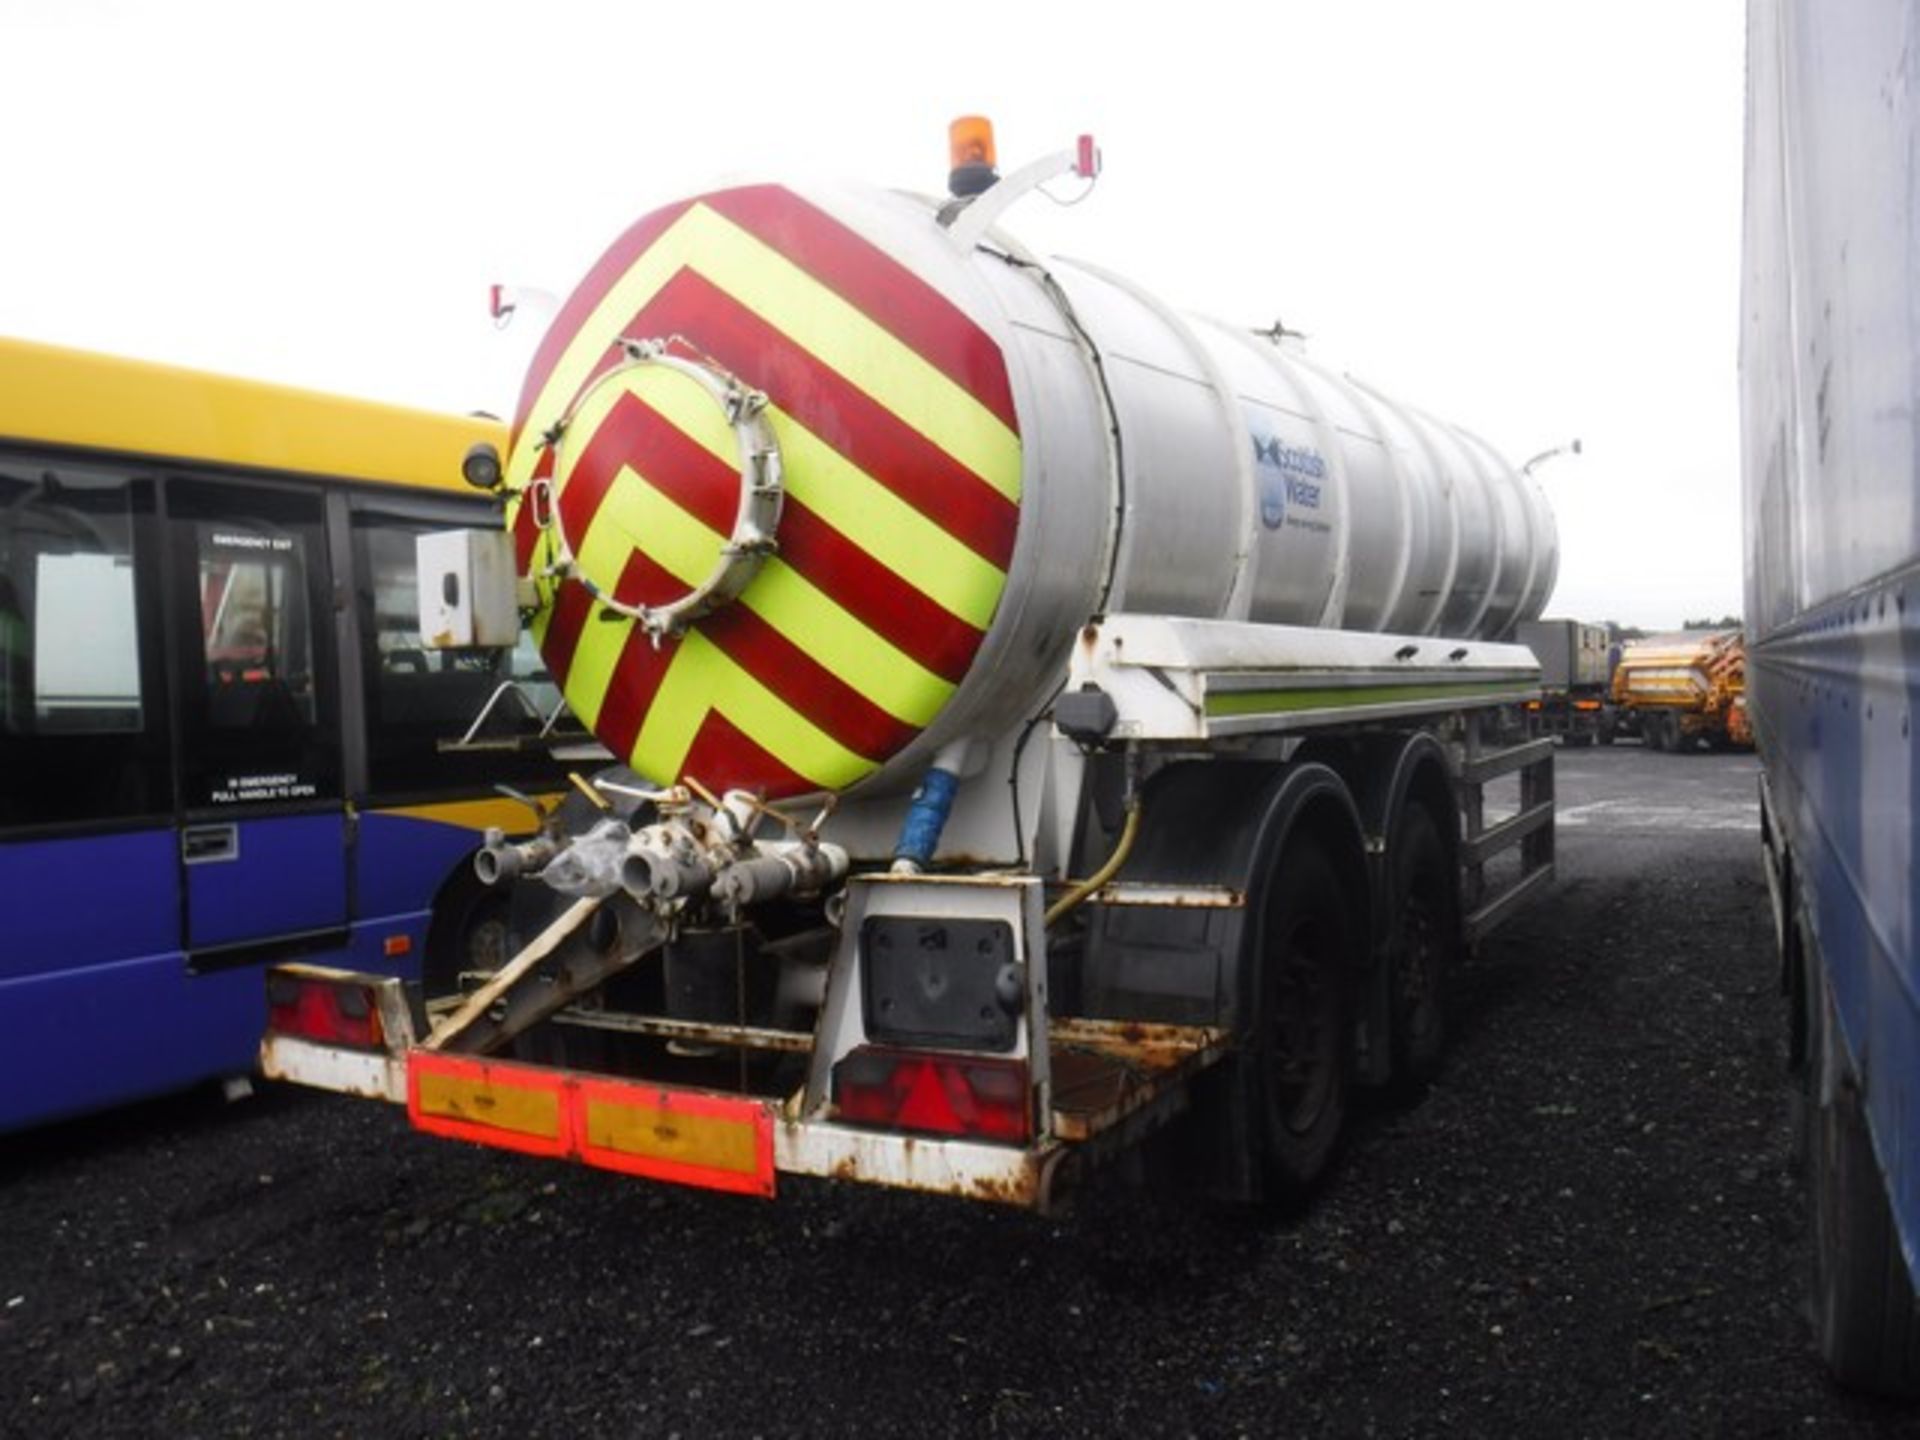 TANKER TRAILER 18000 LTR MAN 2008 Twin Axle - WHALE BOWSER ASSET NO. - C270275 - Image 7 of 8